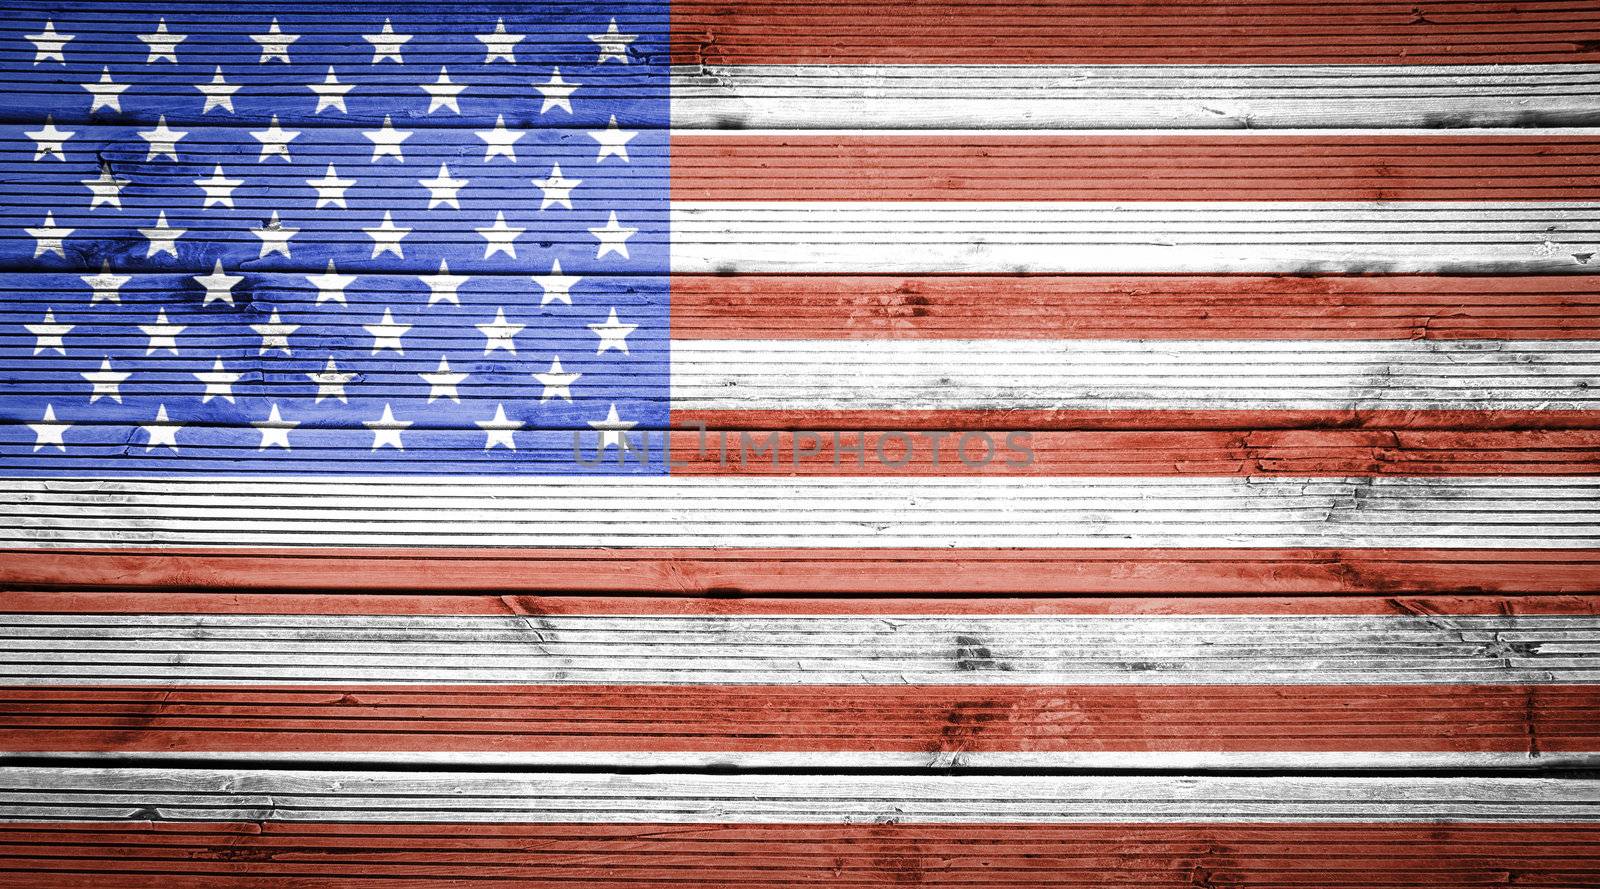 Wood texture background with colors of the flag of United States by doble.d